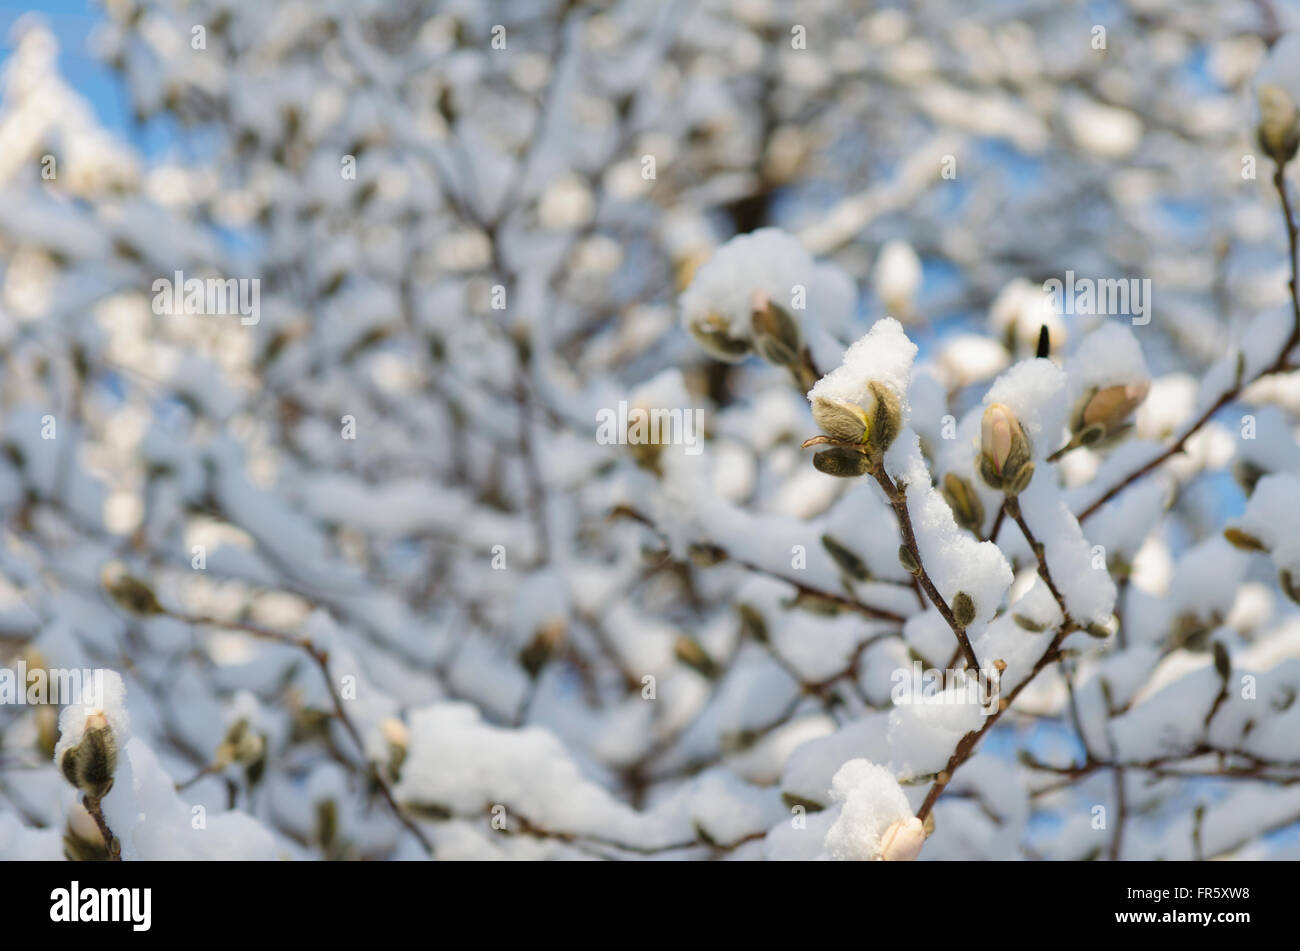 Chappaqua, New York, USA. 21st March, 2016. A snow storm that blanketed the Northeastern United States on the first day of Spring covers a star magnolia tree  (Magnolia Stellata) and its buds already beginning to bloom after a warm winter. Marianne A. Campolongo/Alamy Live News. Stock Photo